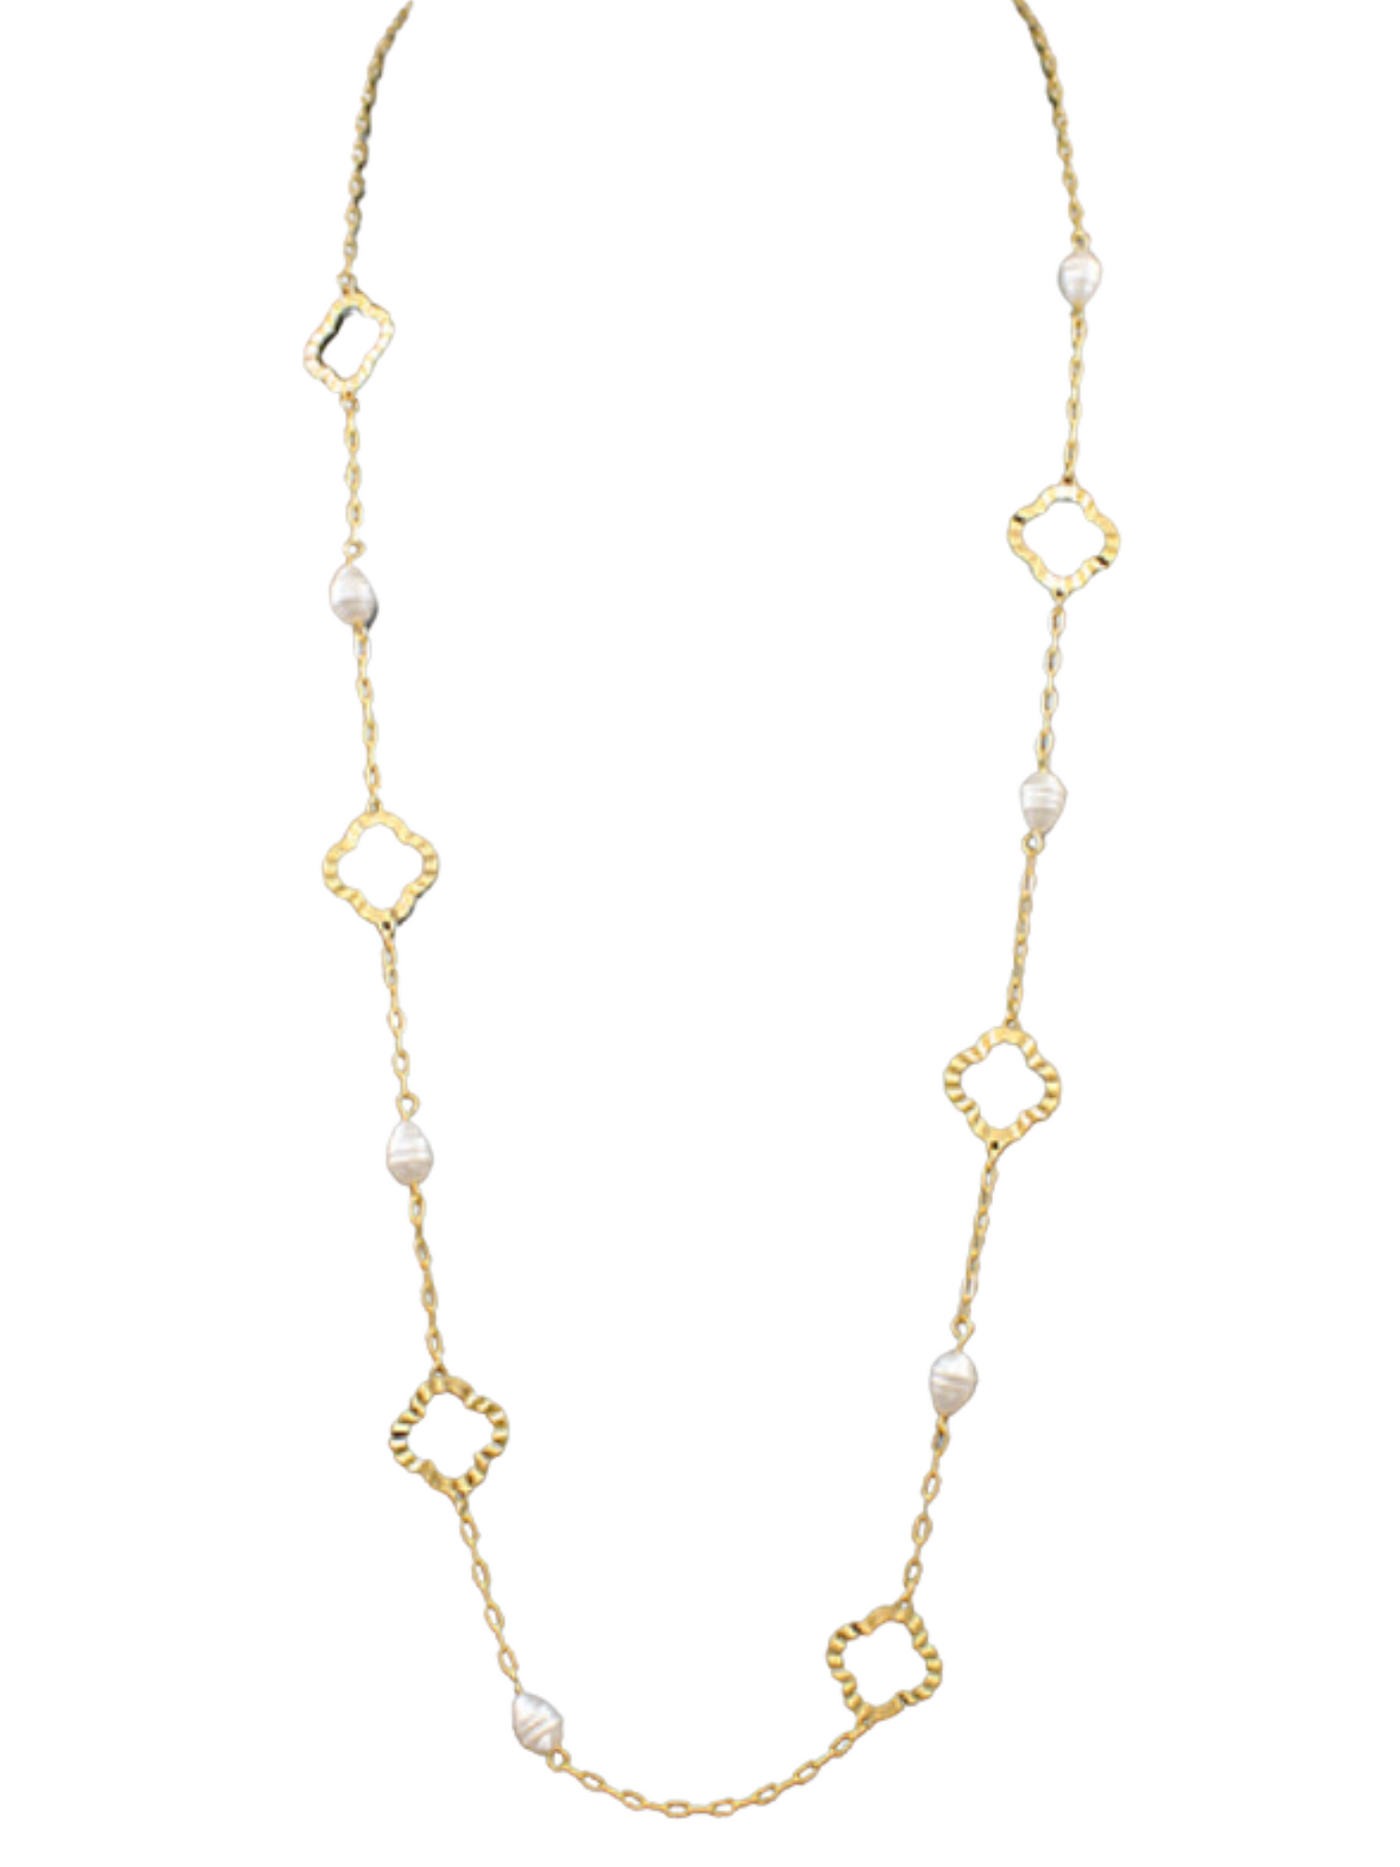 Clover & Pearl Long Necklace in gold